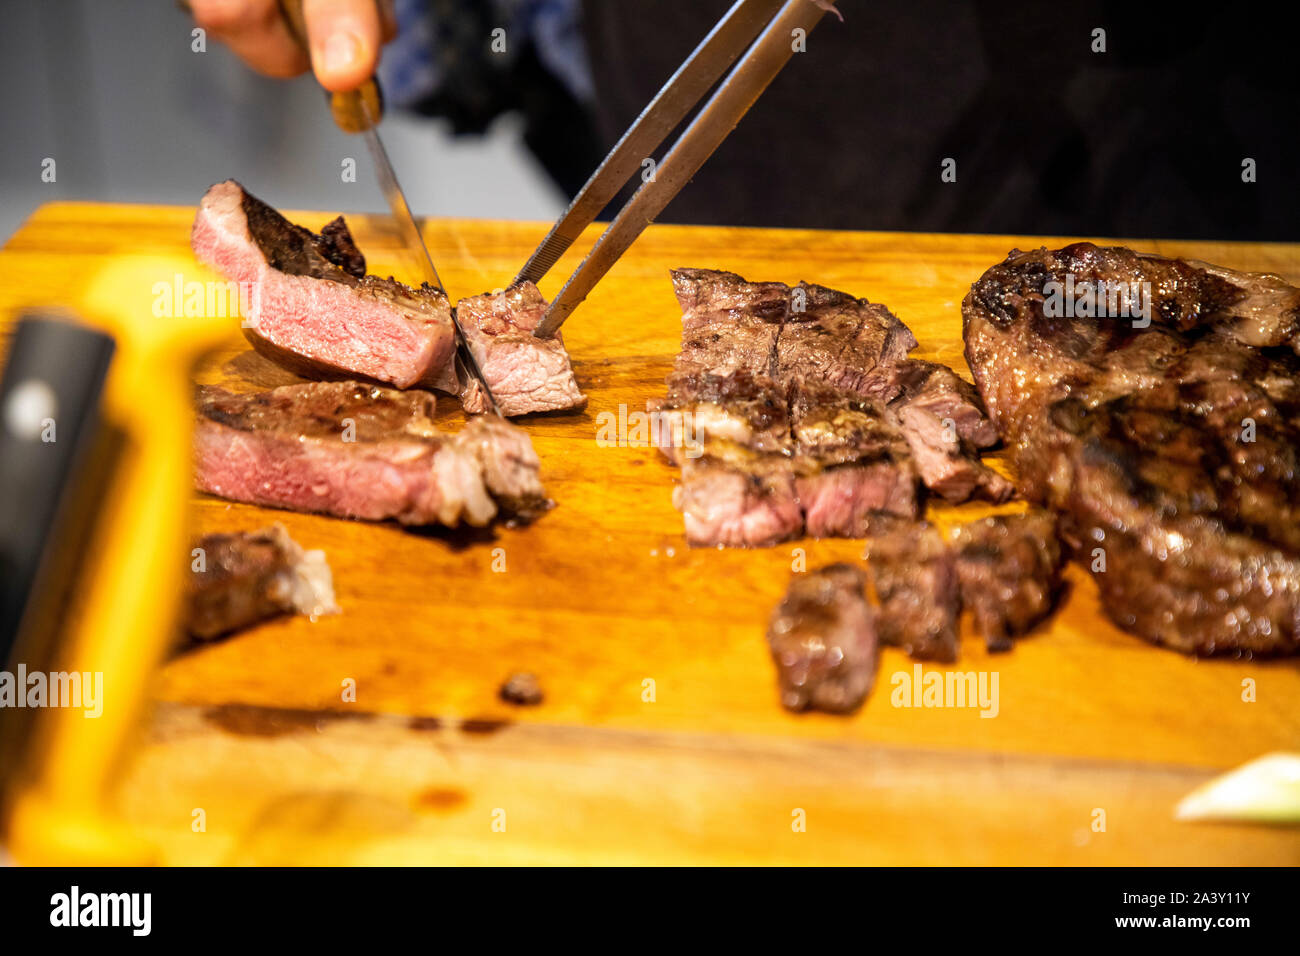 Grilled meat, beef, is cut in portions by the cook, Stock Photo